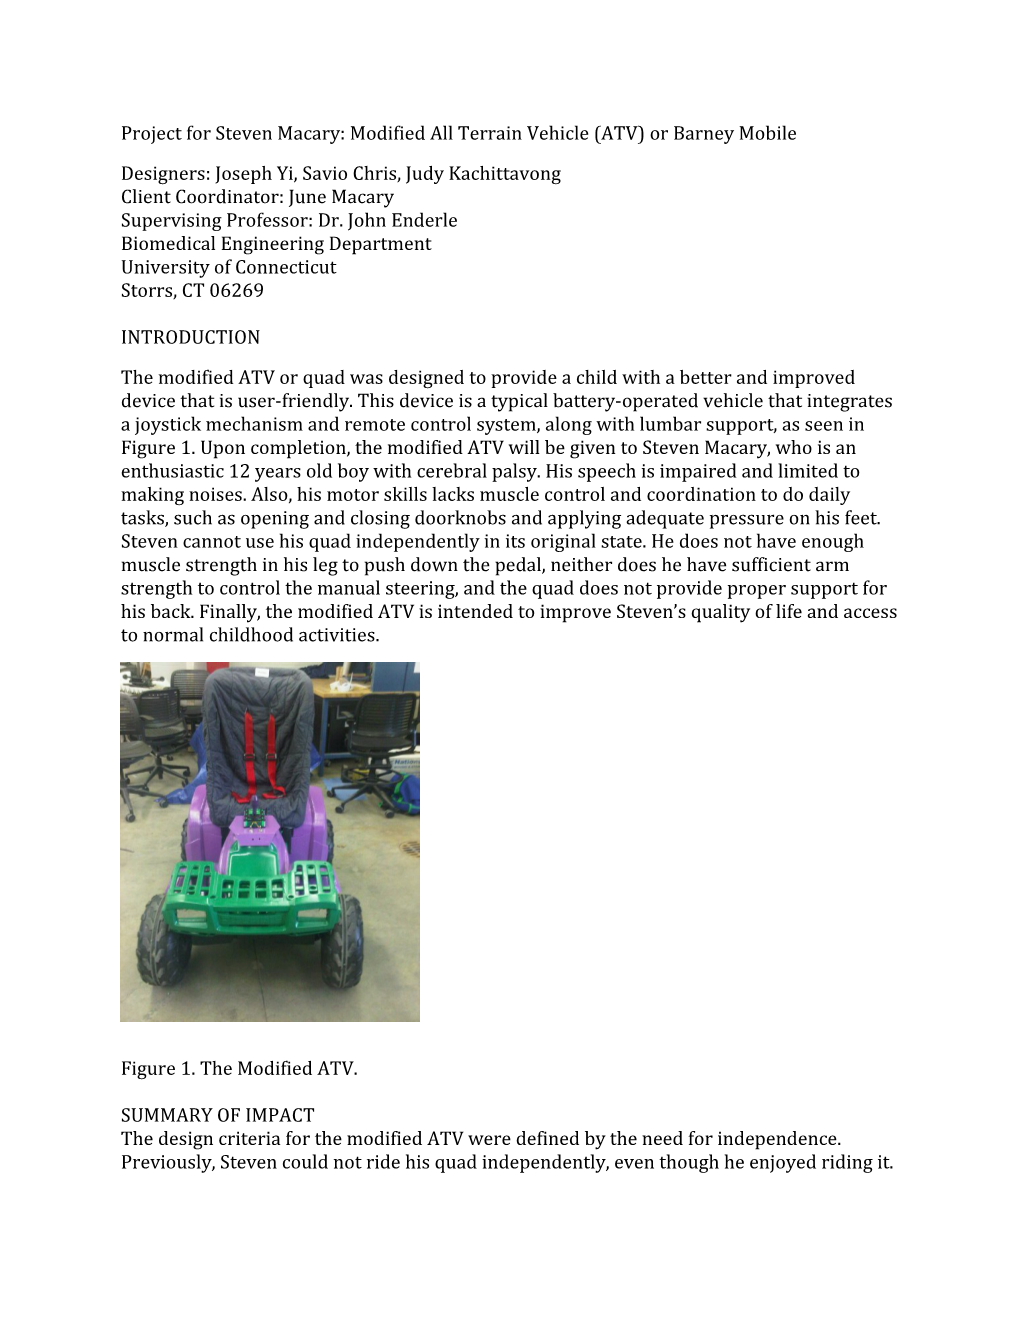 Project for Steven Macary: Modified All Terrain Vehicle (ATV) Or Barney Mobile